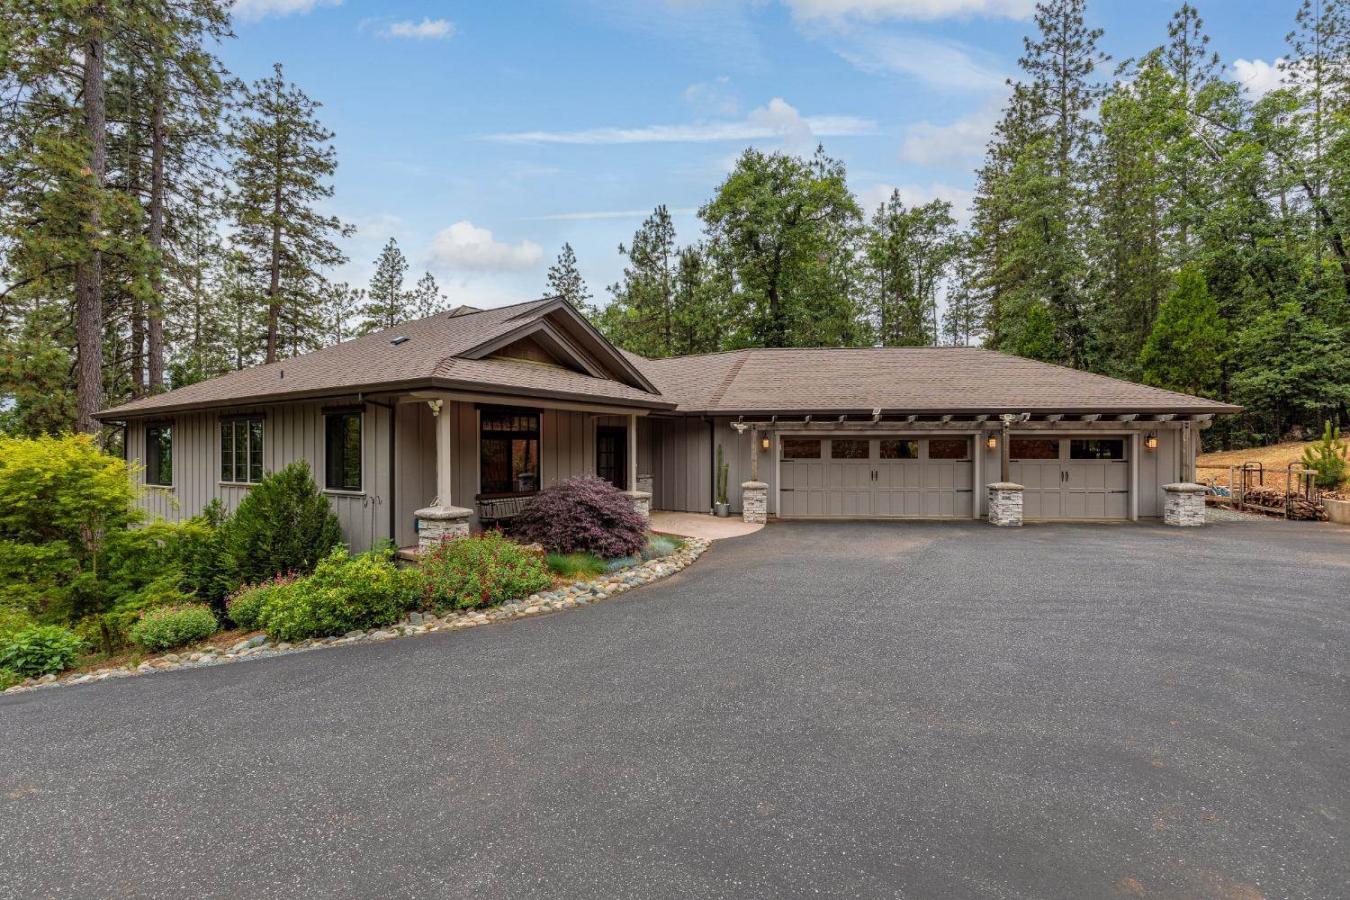 10300 Indian Trail, Nevada City, California, 95959, United States, 3 Bedrooms Bedrooms, ,2 BathroomsBathrooms,Residential,For Sale,10300 Indian Trail,1284994